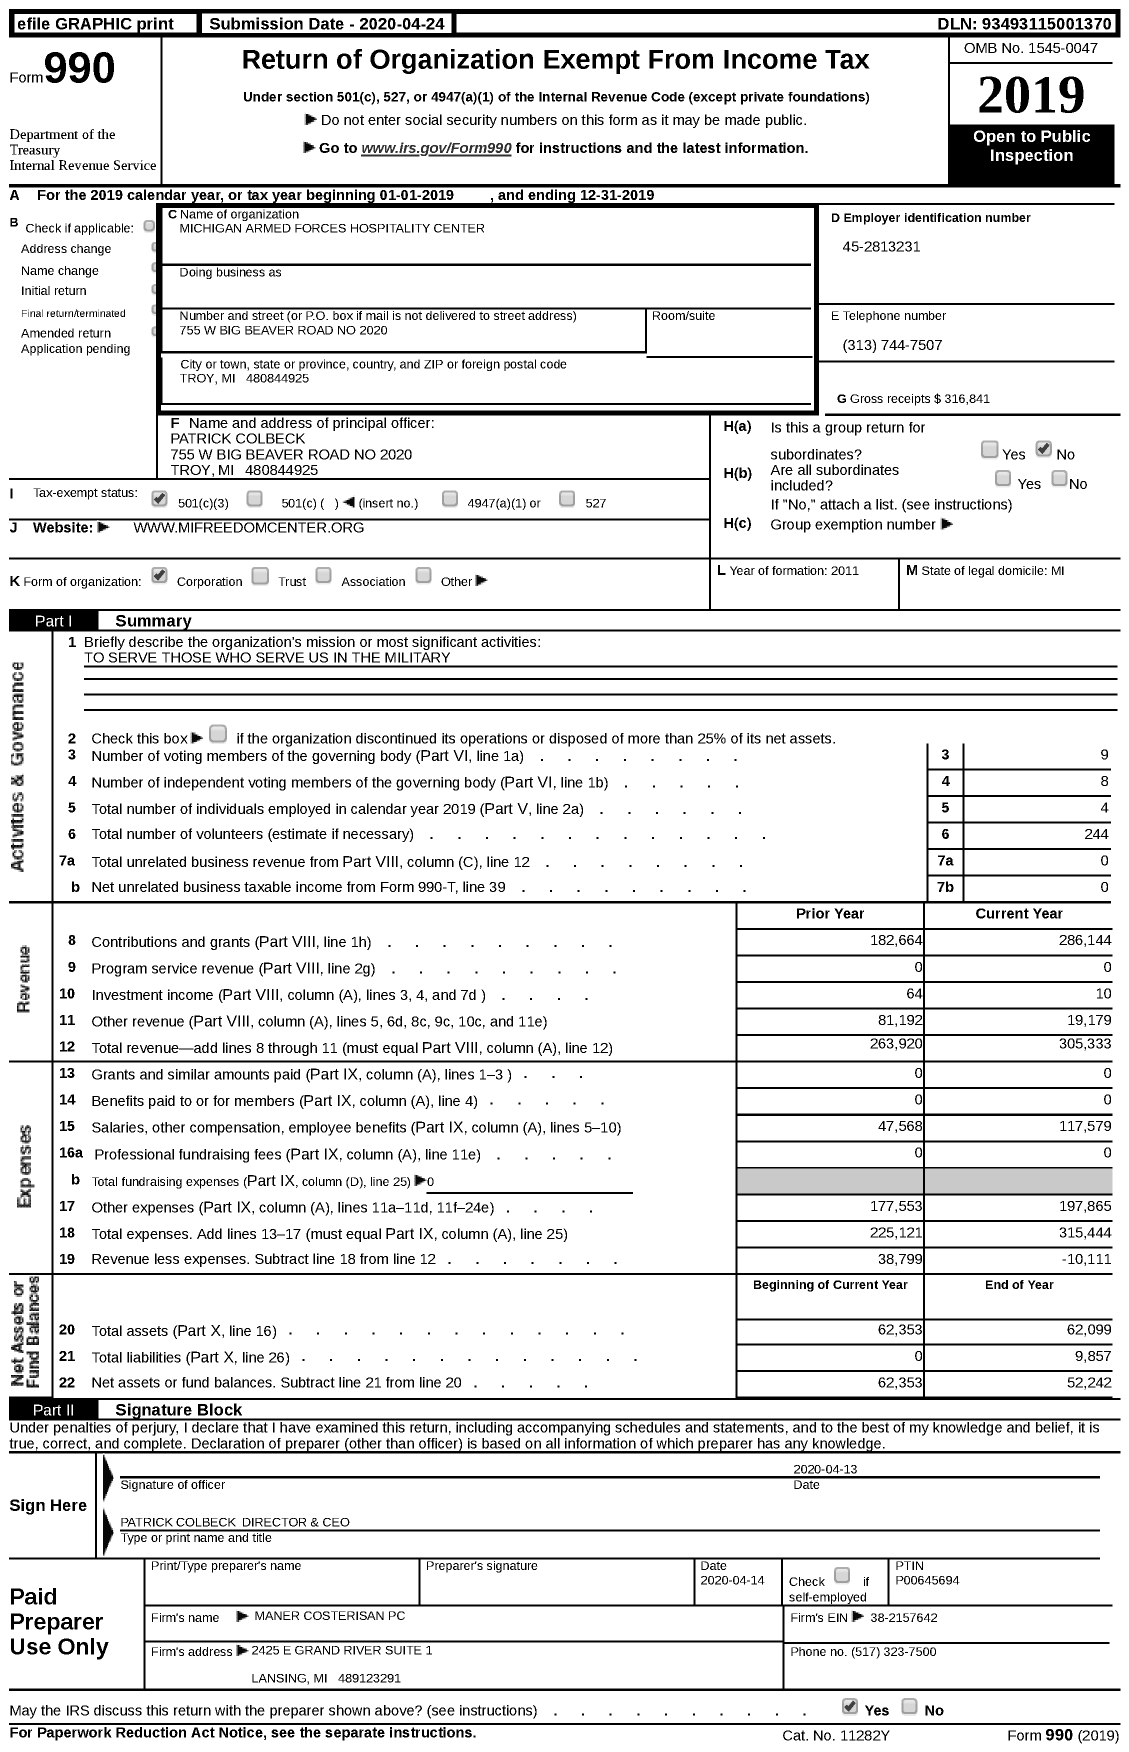 Image of first page of 2019 Form 990 for Michigan Armed Forces Hospitality Center